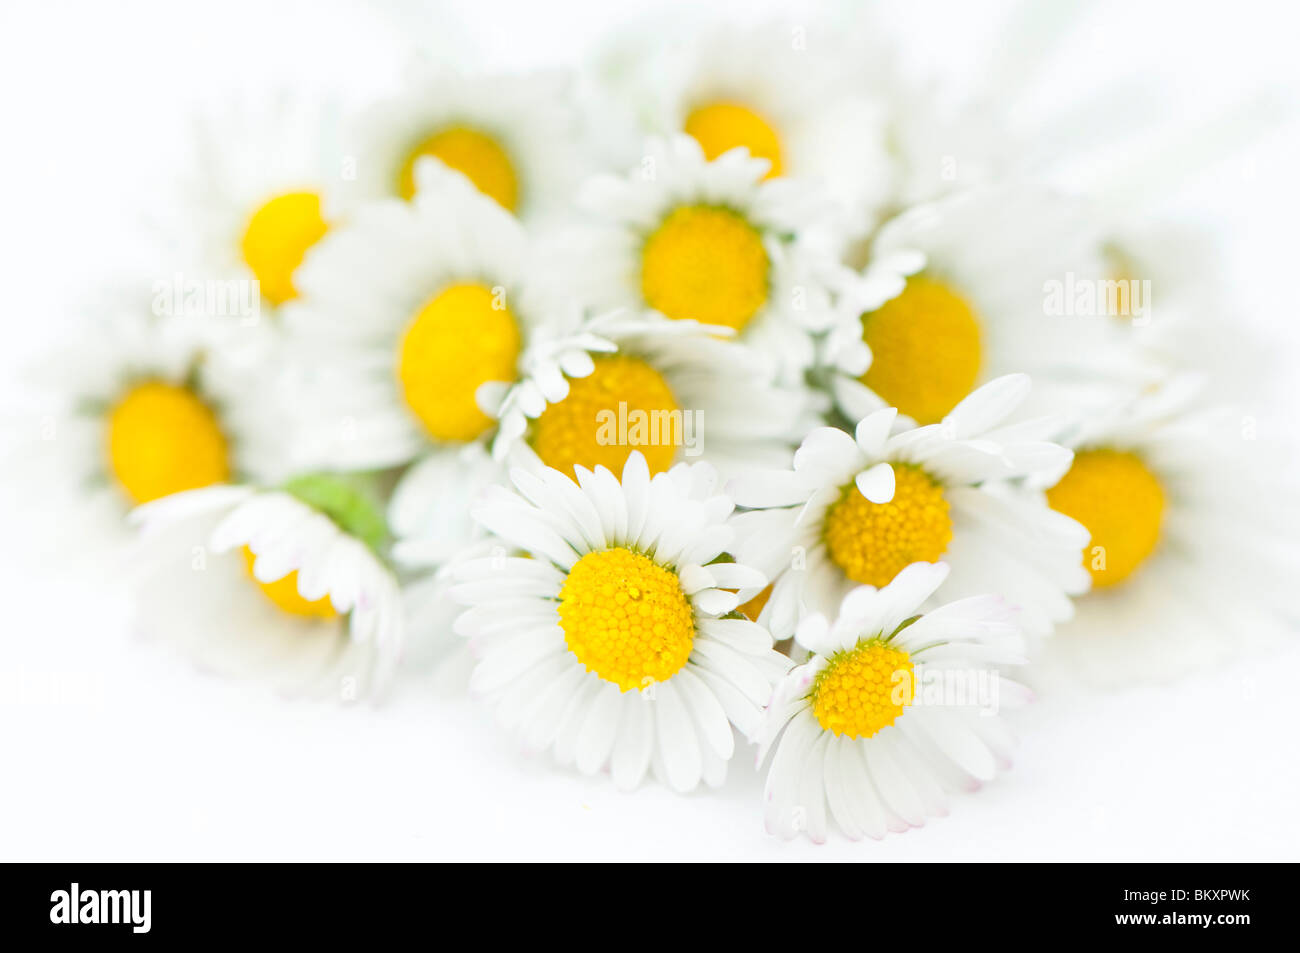 Close up of a bunch of daisies, Bellis perennis, against a white background Stock Photo